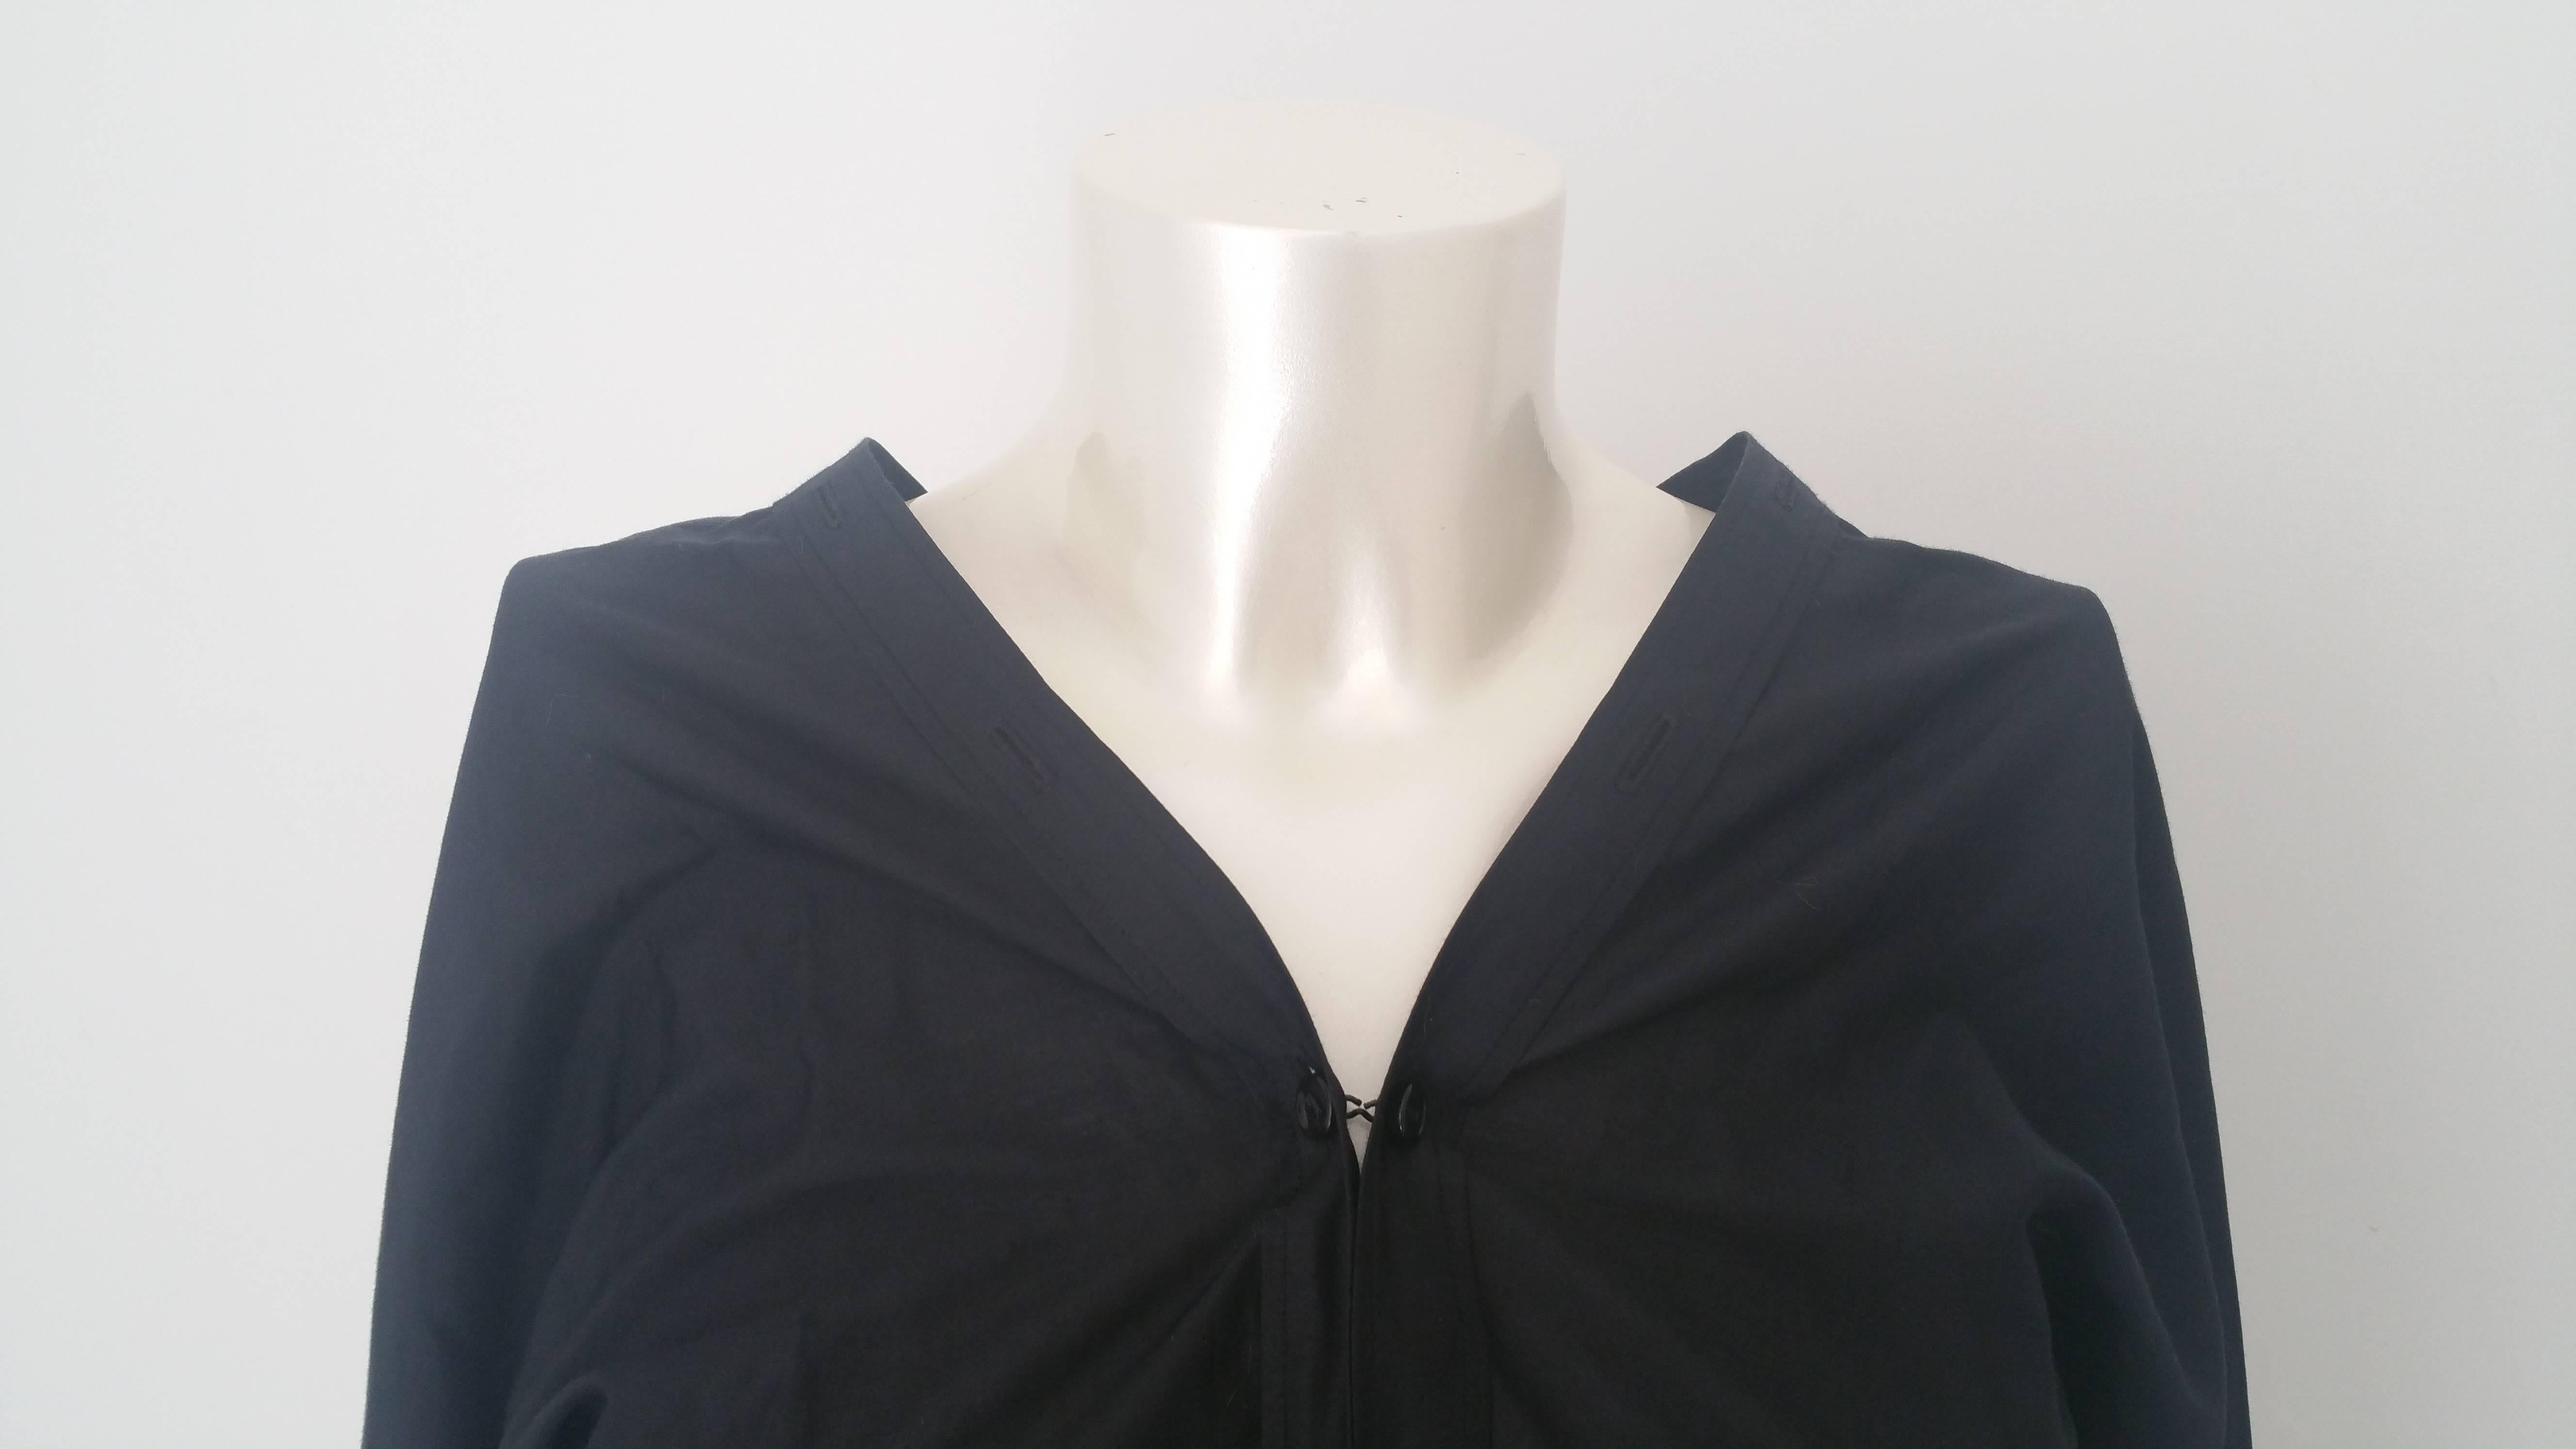 1990s Yves Saint Laurent black shirt by Tom Ford
totally made in france